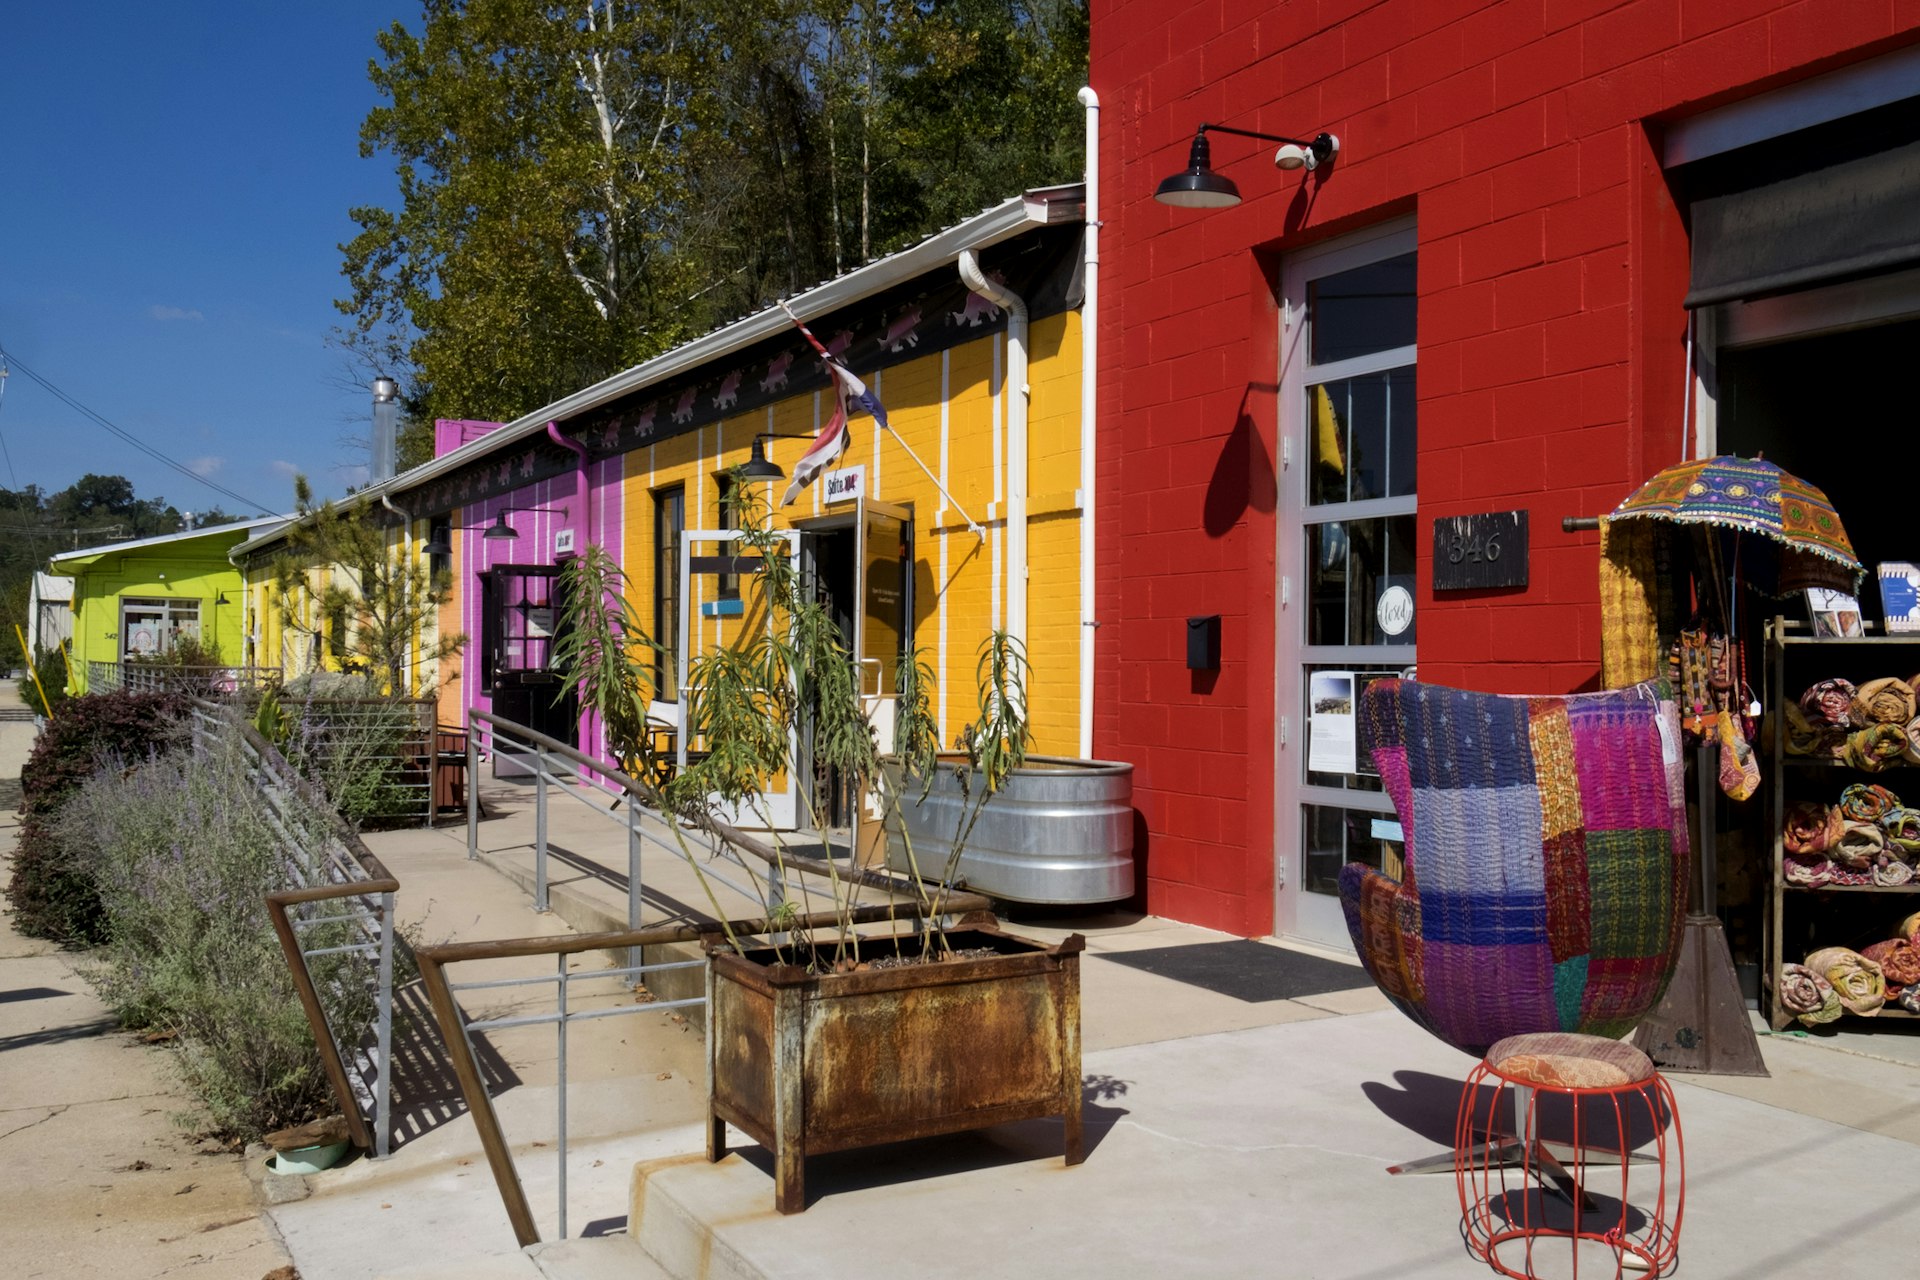 The brightly colored buildings of the River Arts District in Asheville, NC